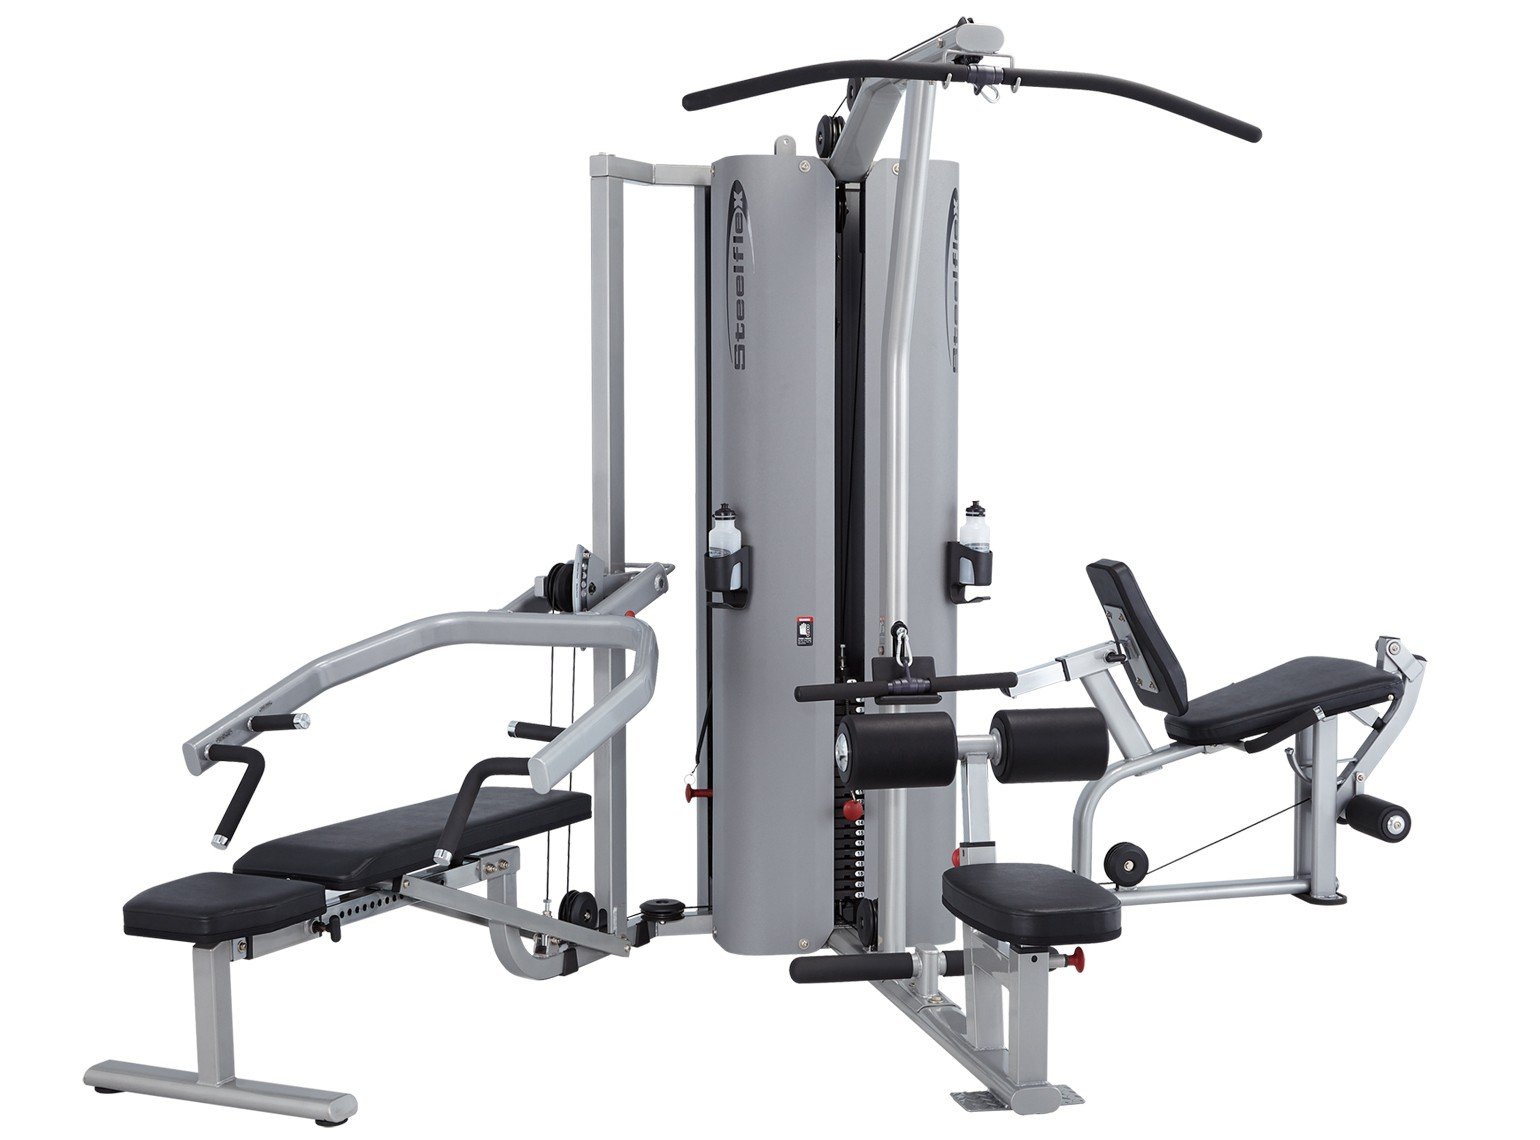 SteelFlex MG300 Commercial Multi Station Gym Machine 630 lb. Pulley Weight Stack - image 1 of 4